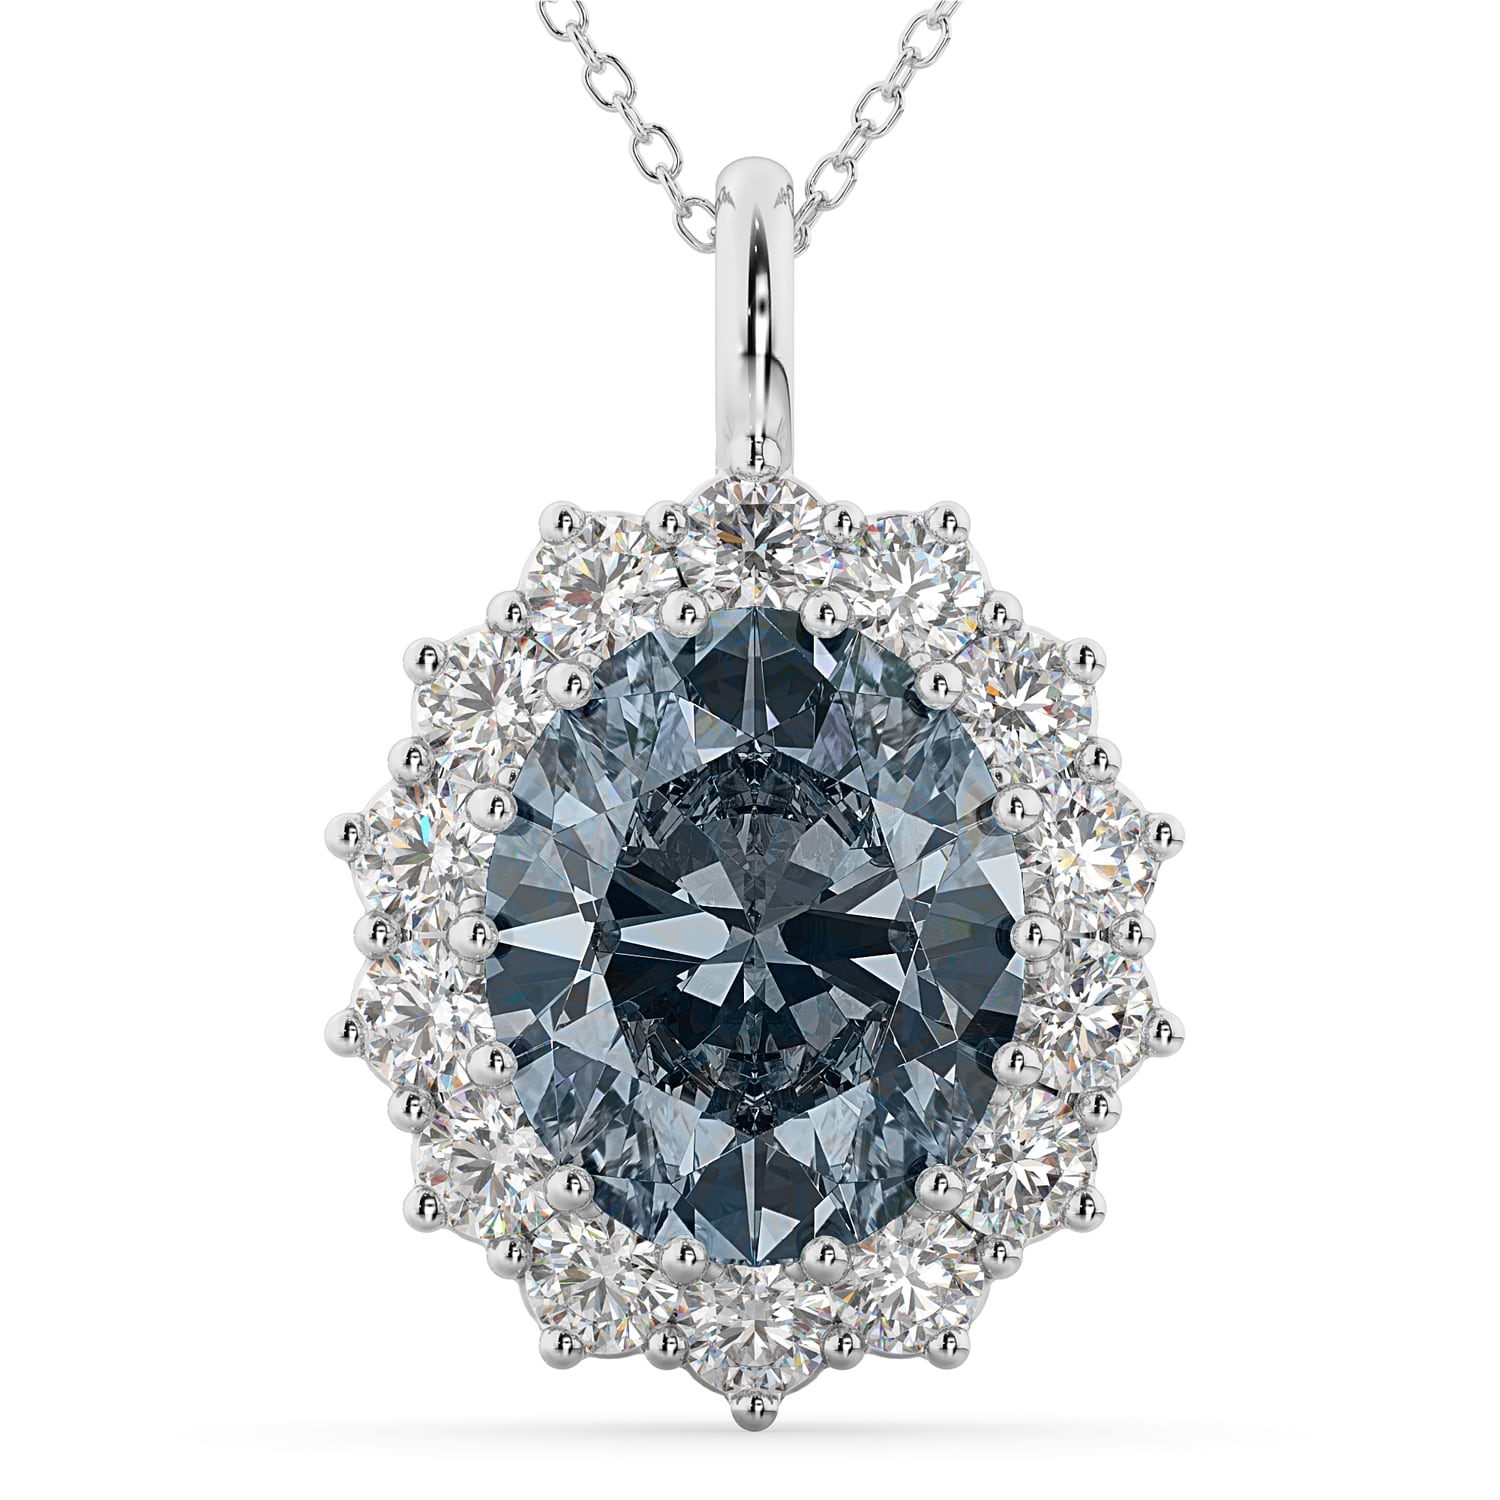 Oval Gray Spinel & Diamond Halo Pendant Necklace 14k White Gold (6.40ct)